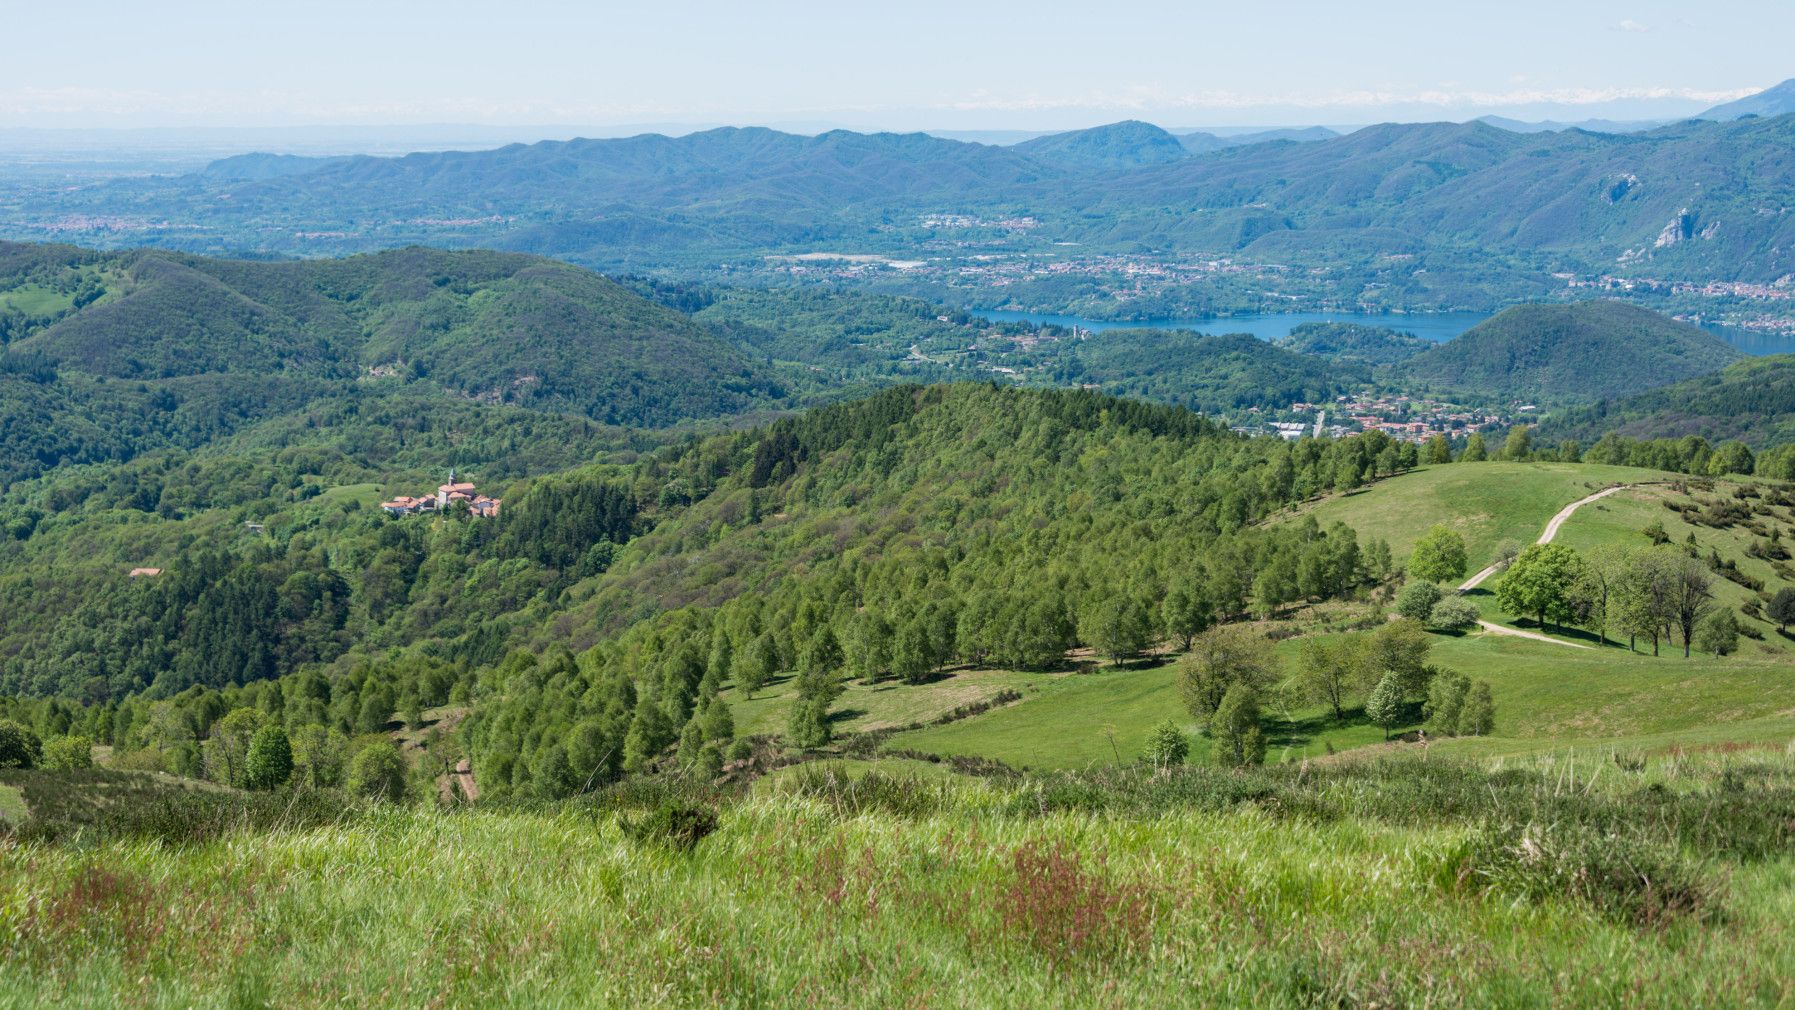 Coiromonte and Lage d'Orta